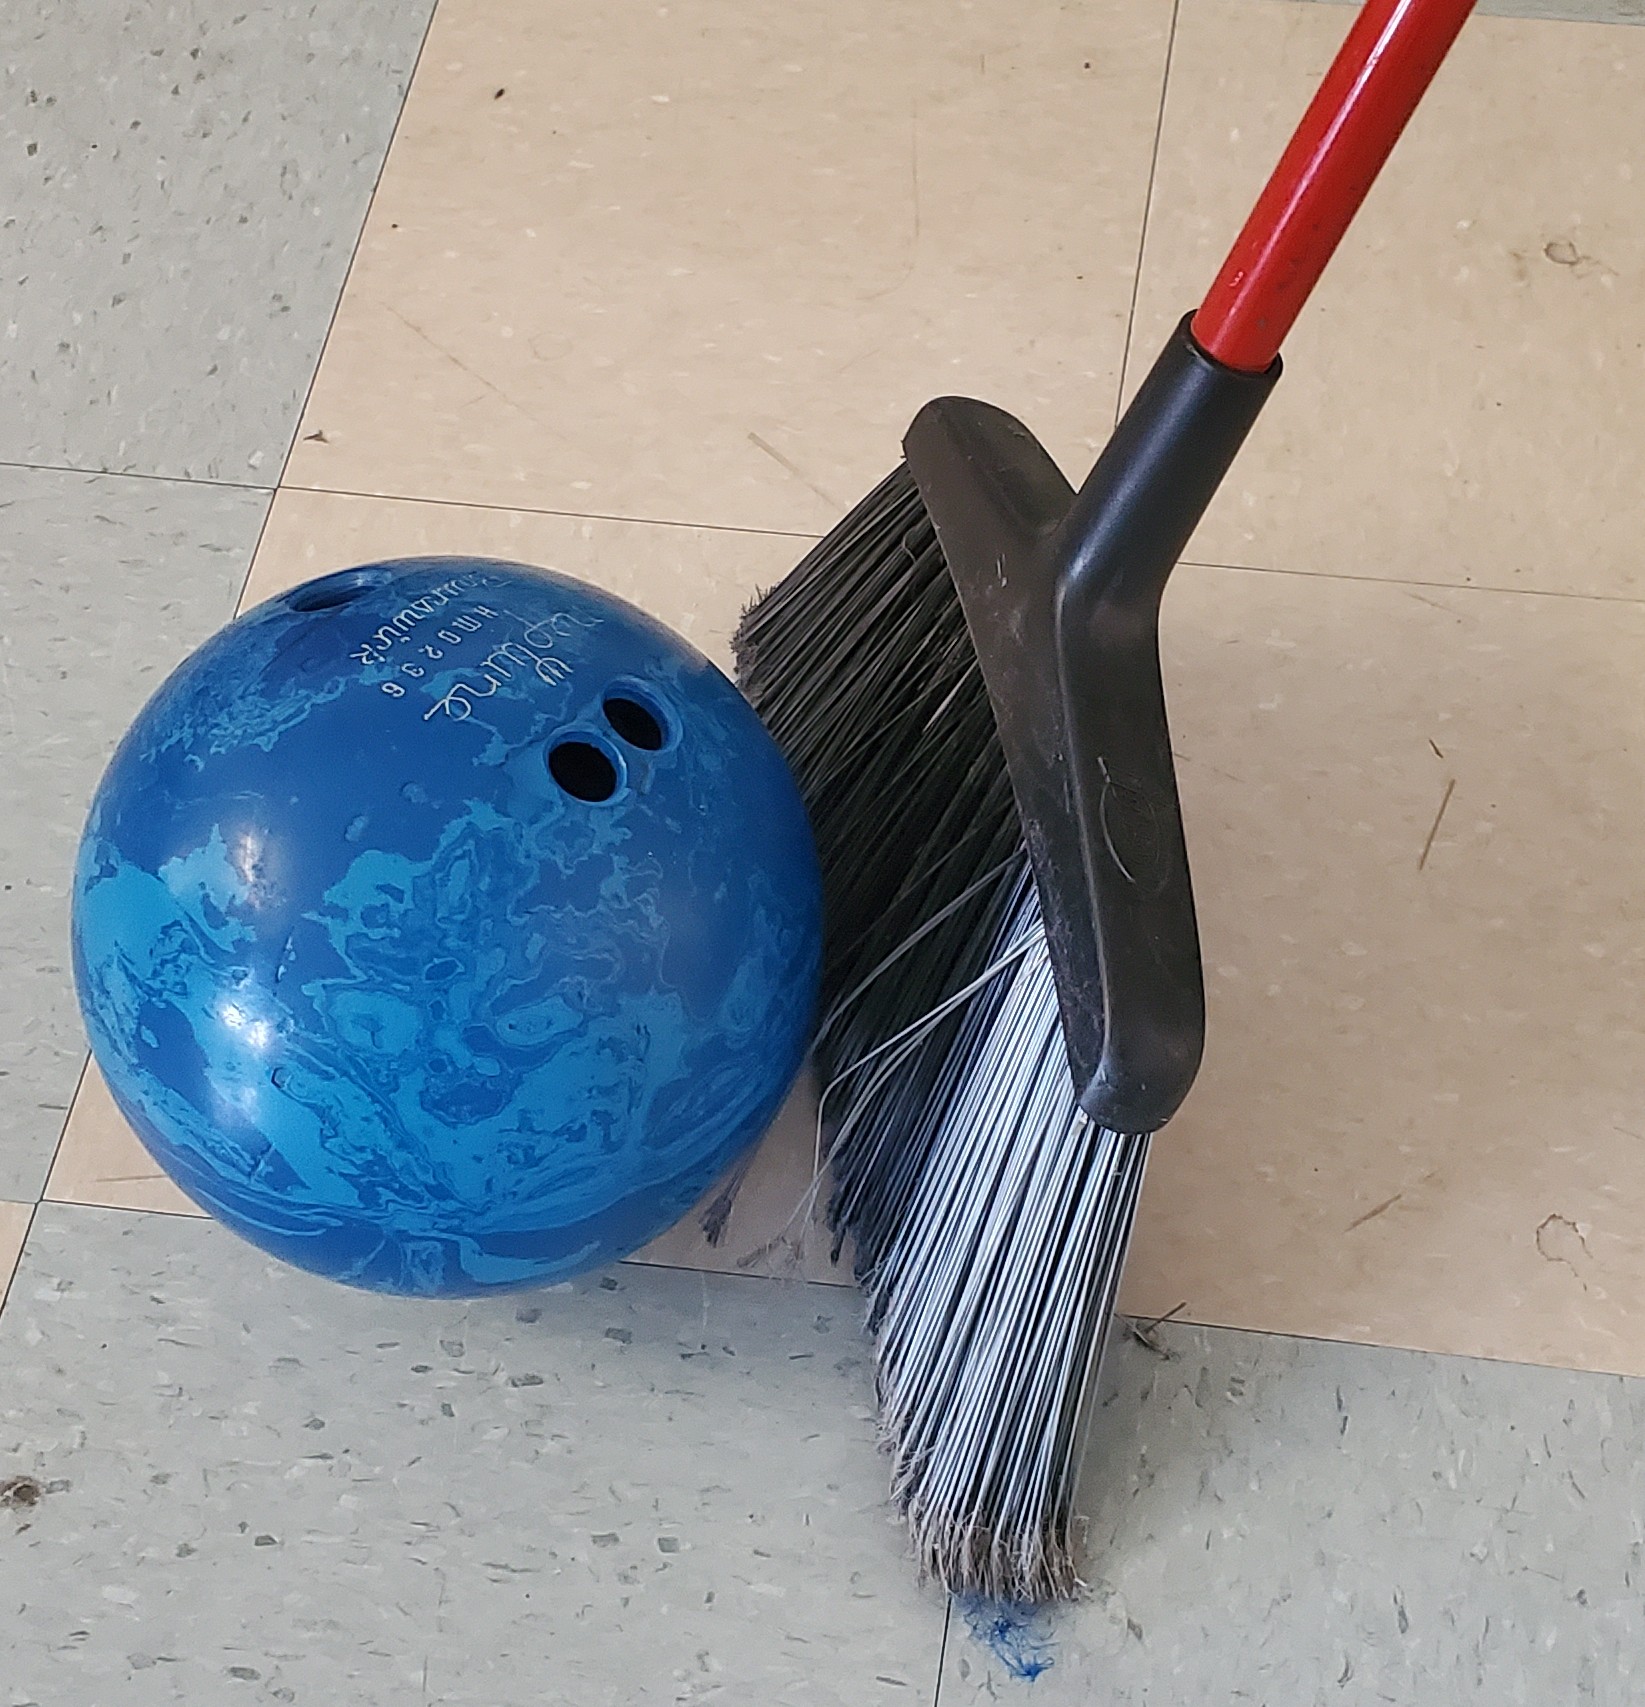 photo showing a bowling ball and broom